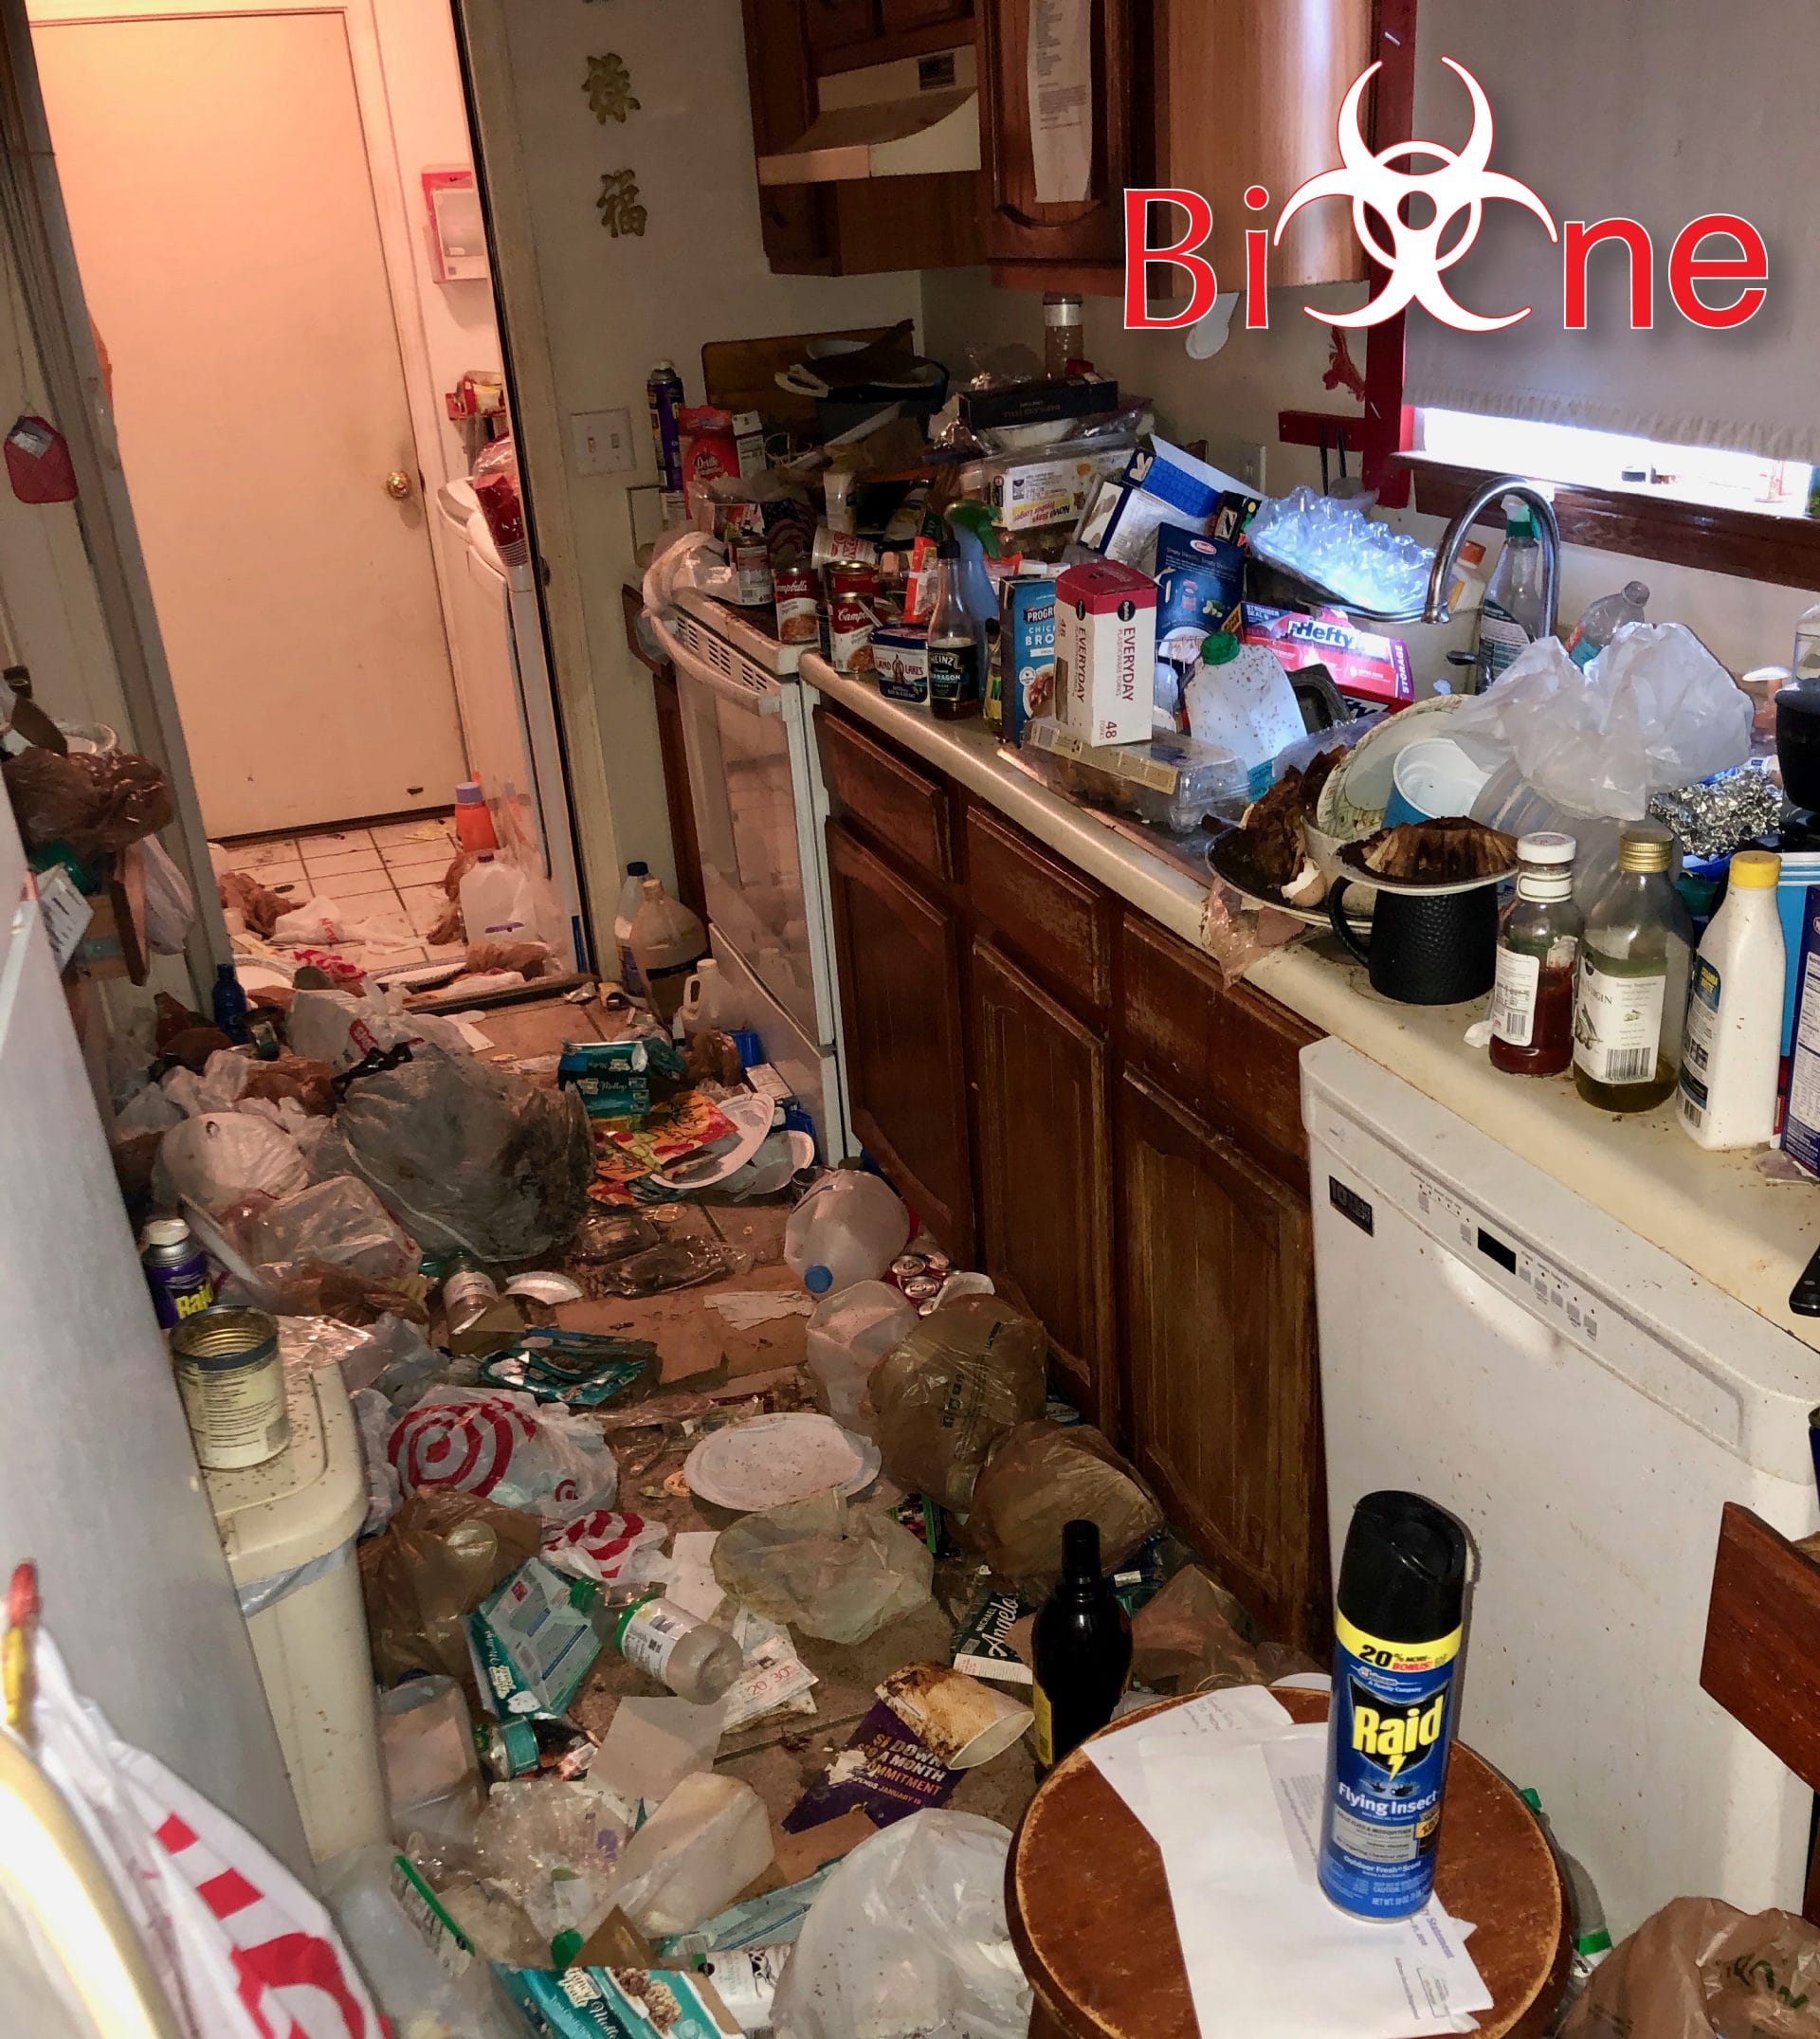 Properties impacted by hoarding pose several risk factors for the victims.